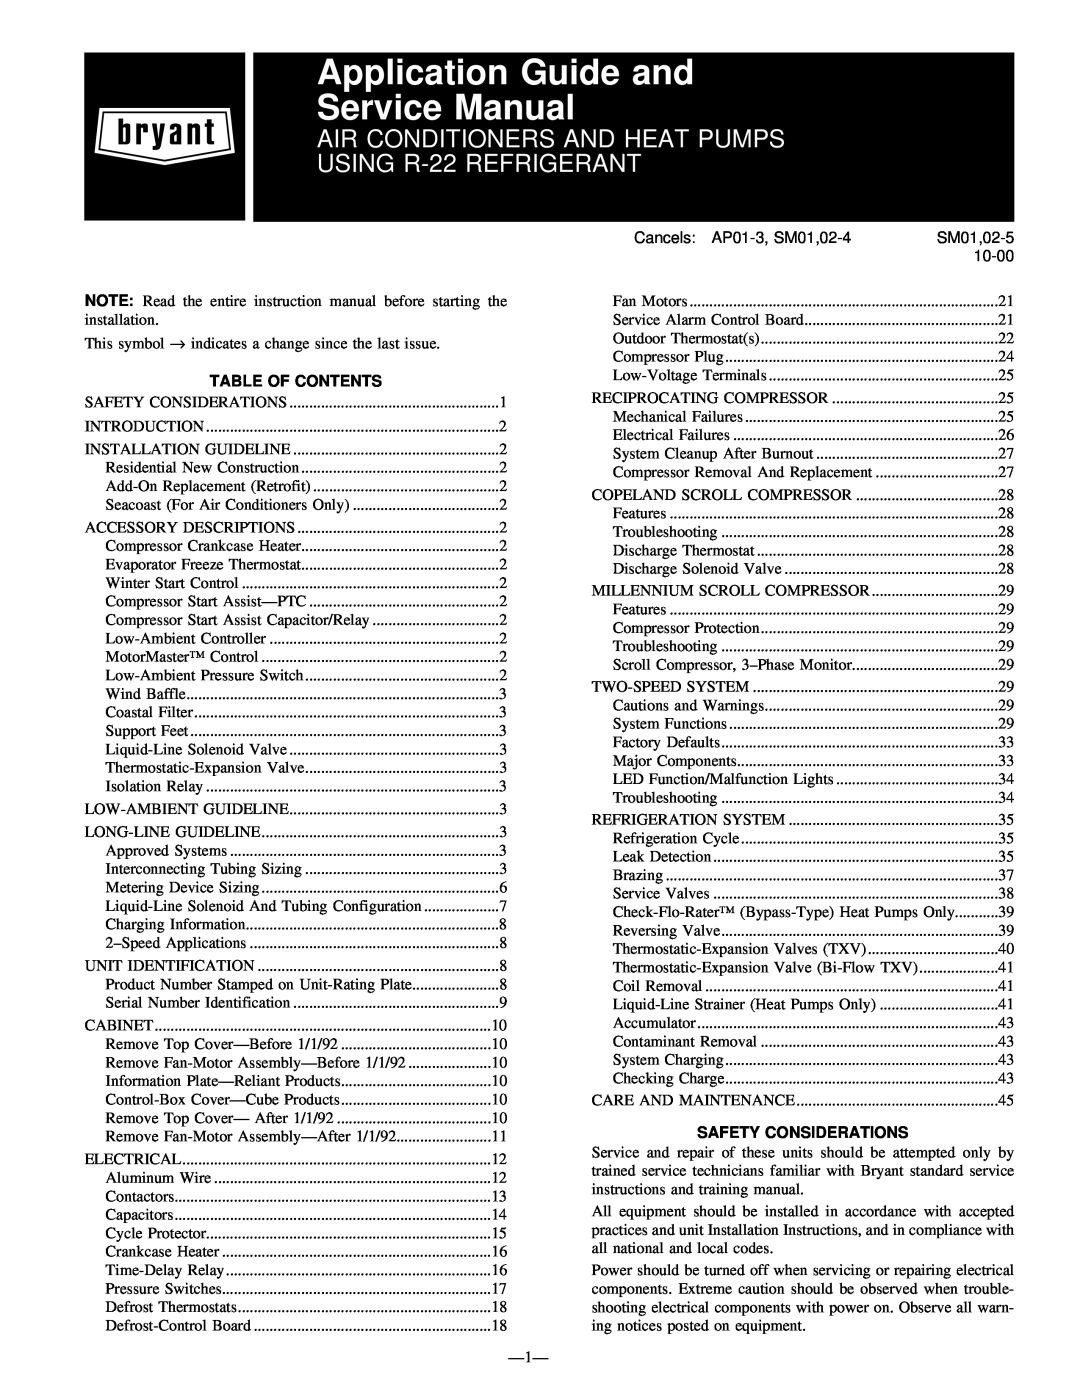 Bryant R-22 service manual Application Guideline and Service Manual, Residential Air Conditioners And Heat Pumps 